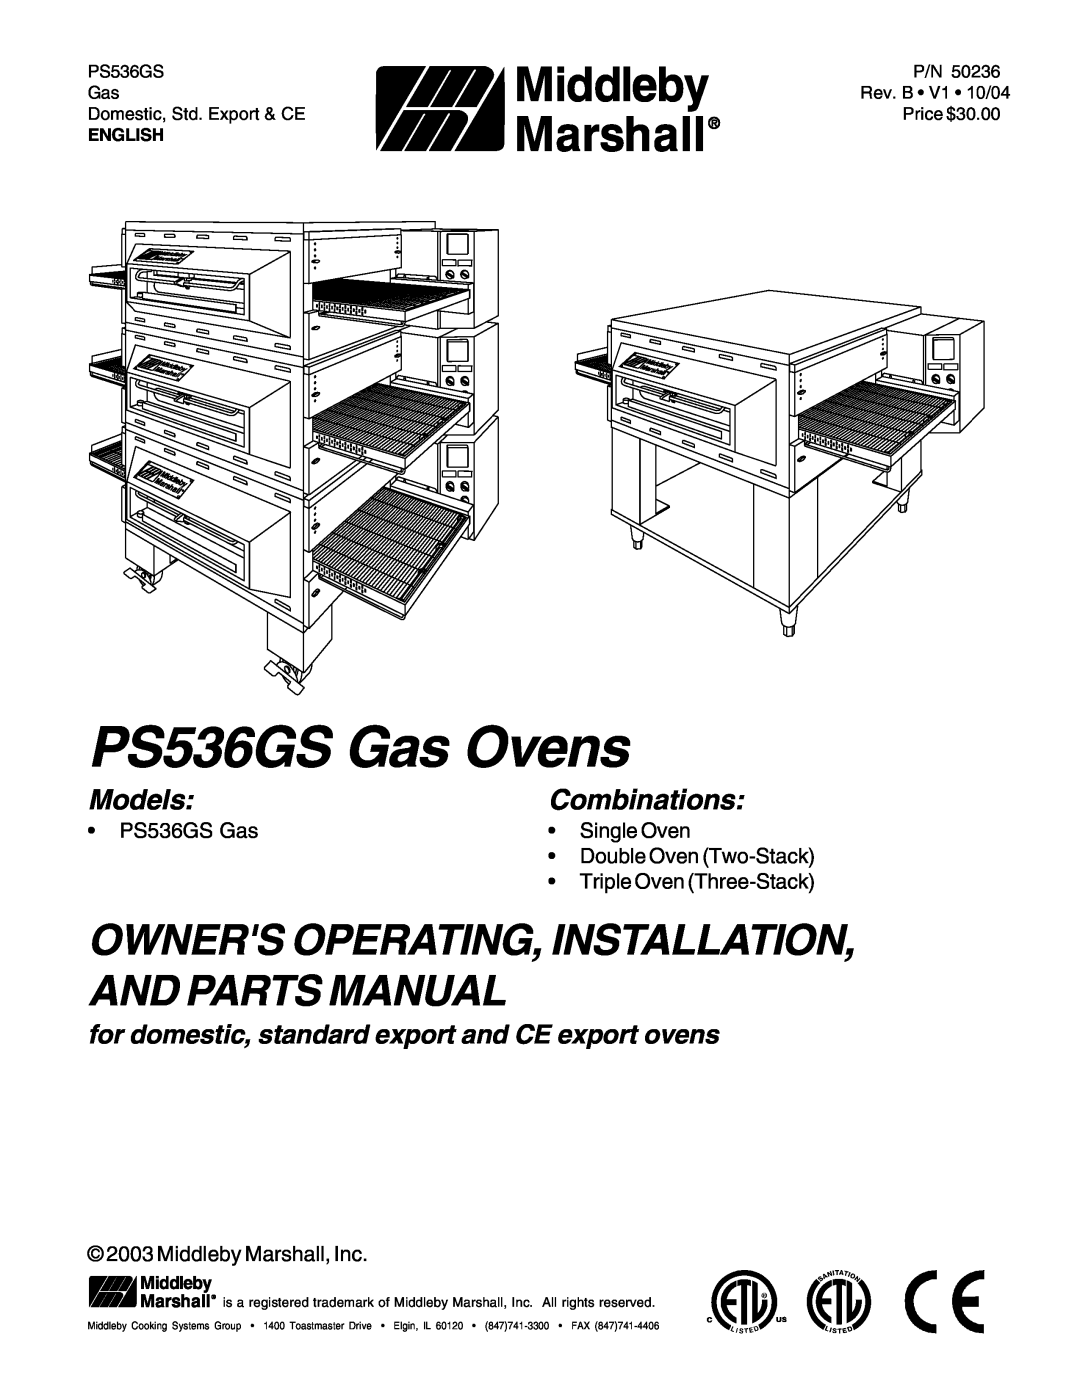 Middleby Marshall PS53GS Gas manual Models, Combinations, PS536GS Gas Ovens 